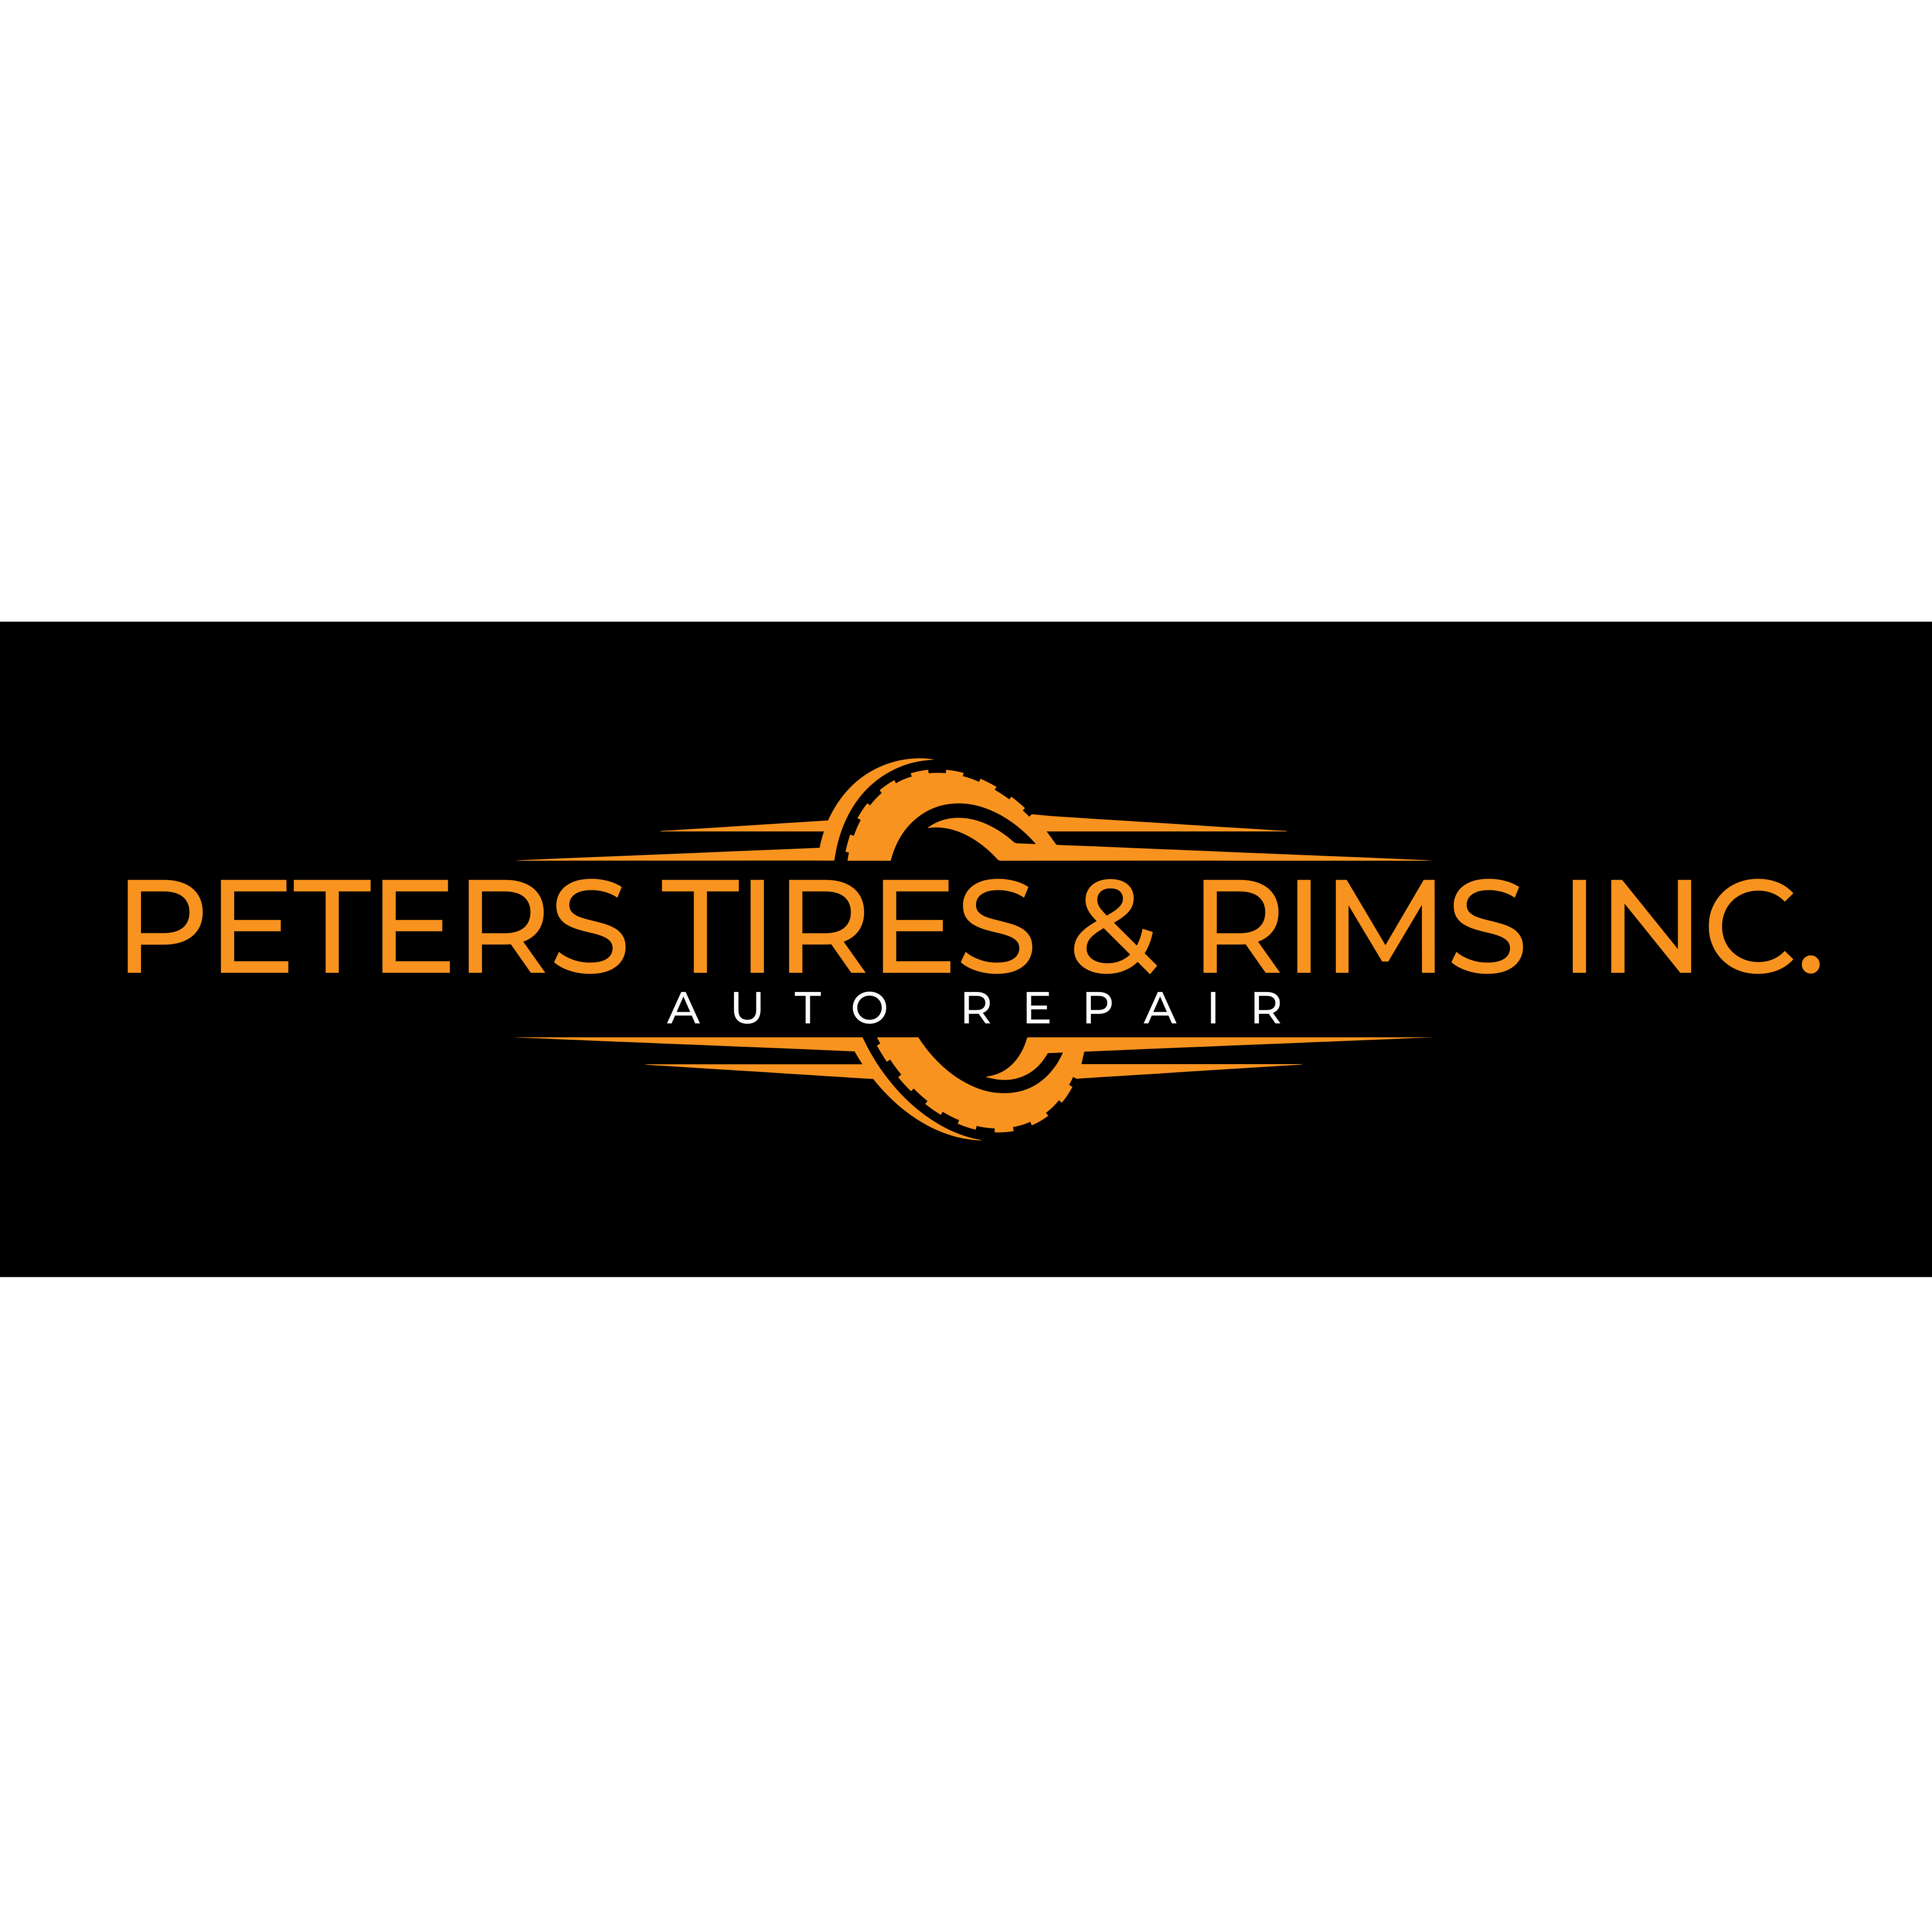 Peters Tires & Rims Incorporated